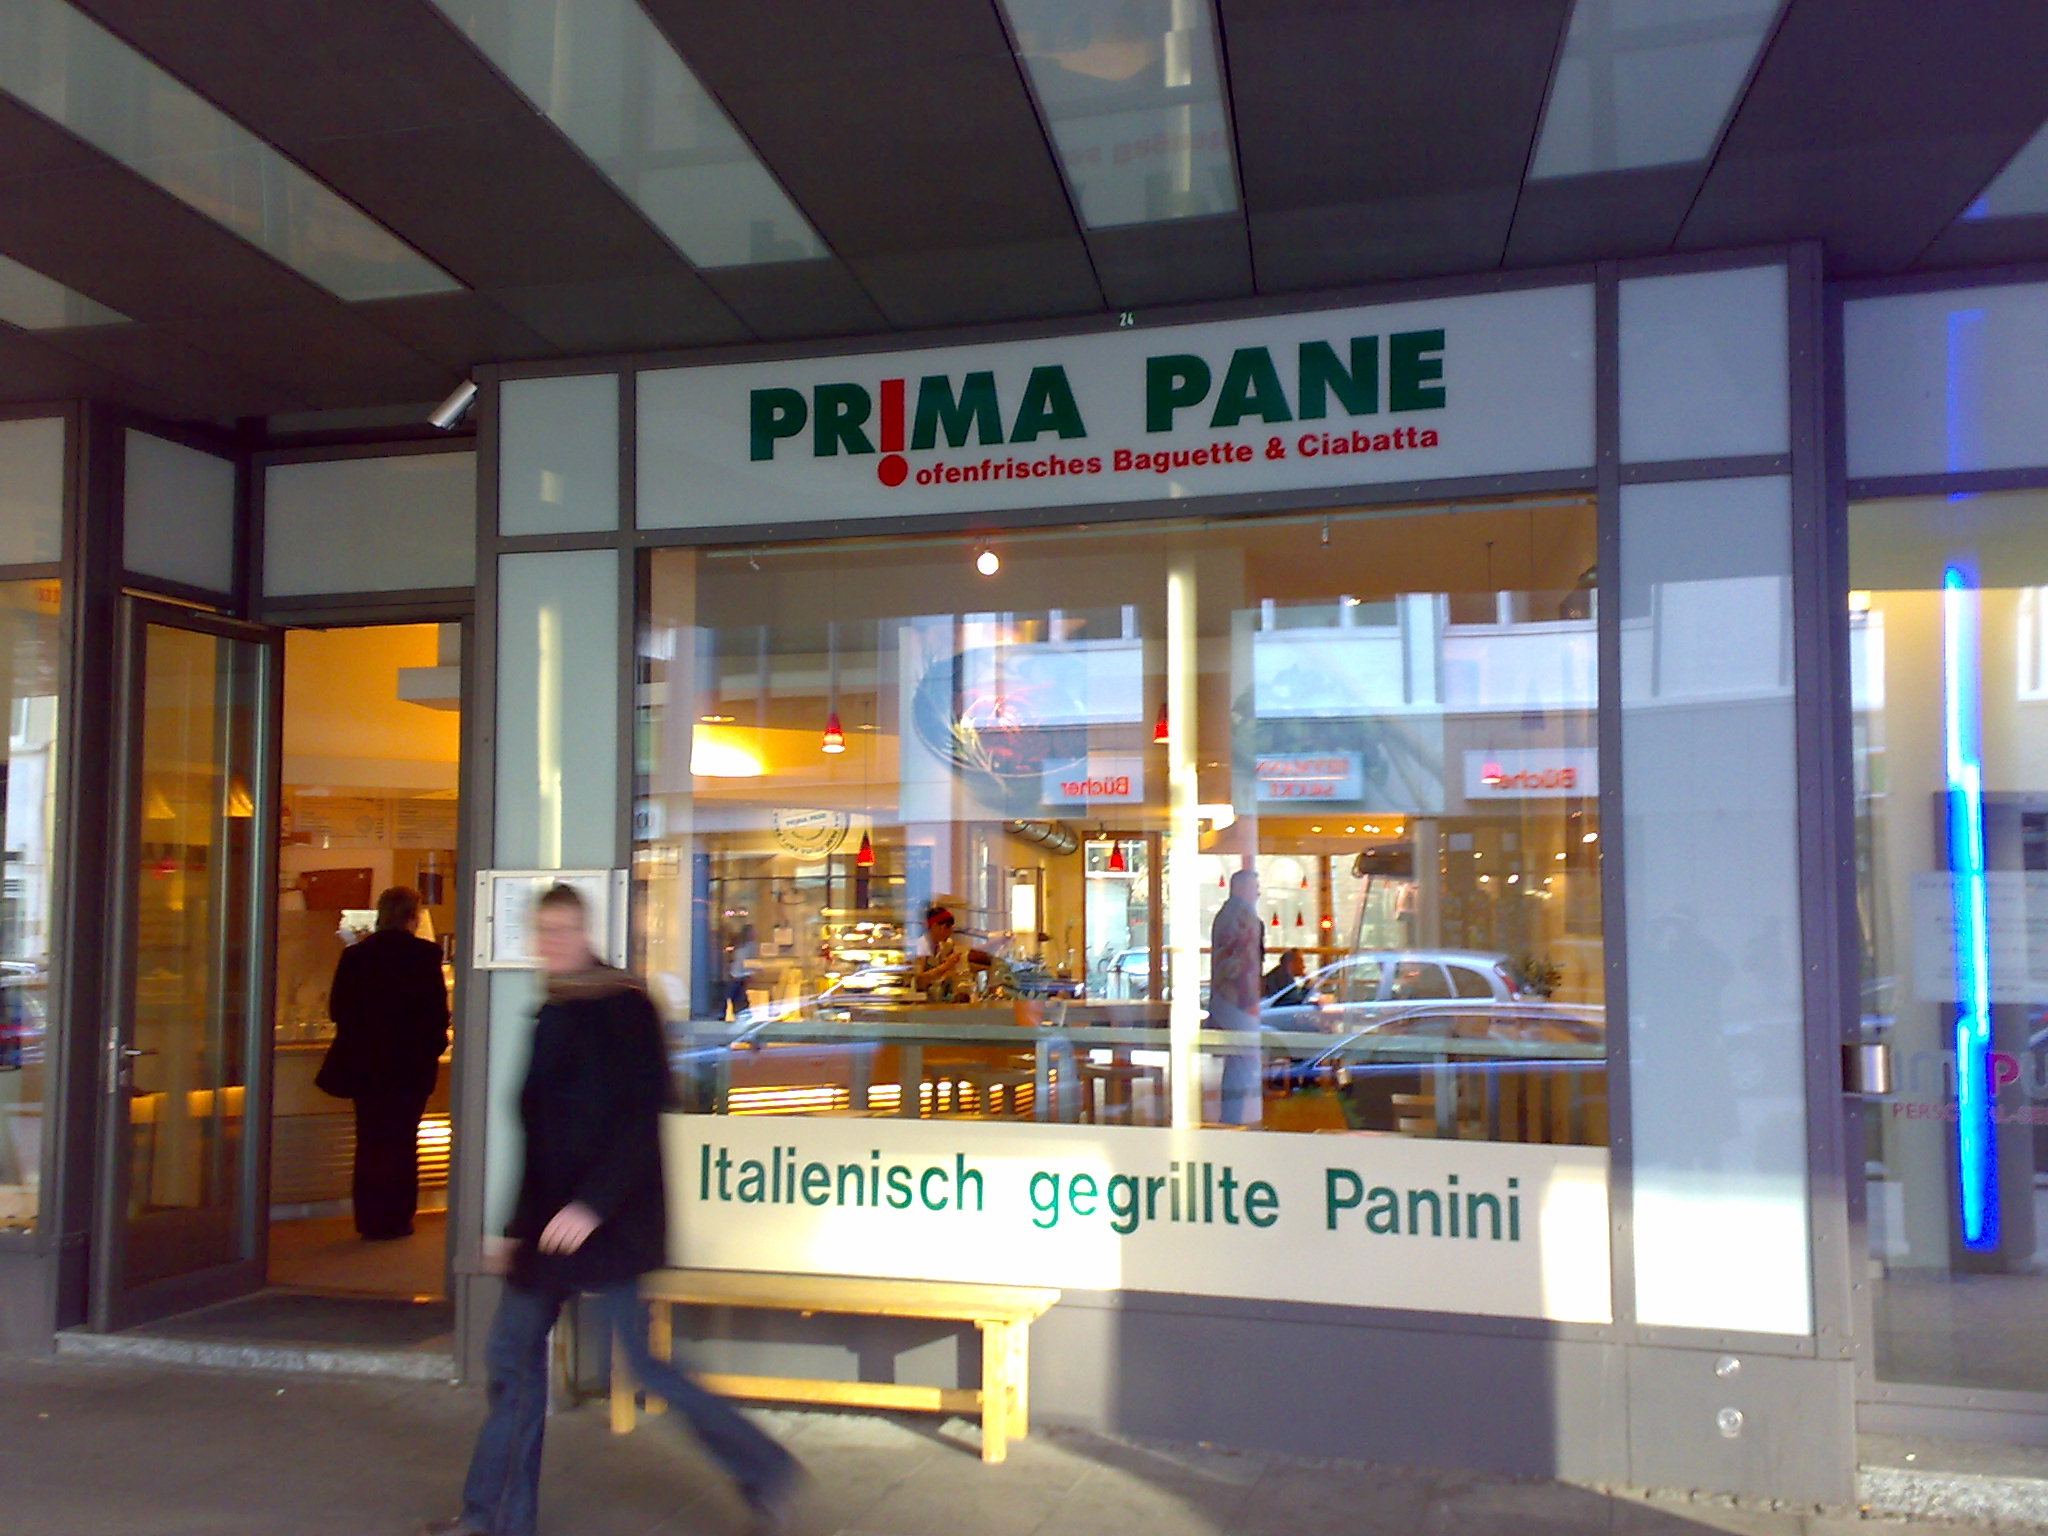 the front entrance to a store showing a man in the reflection